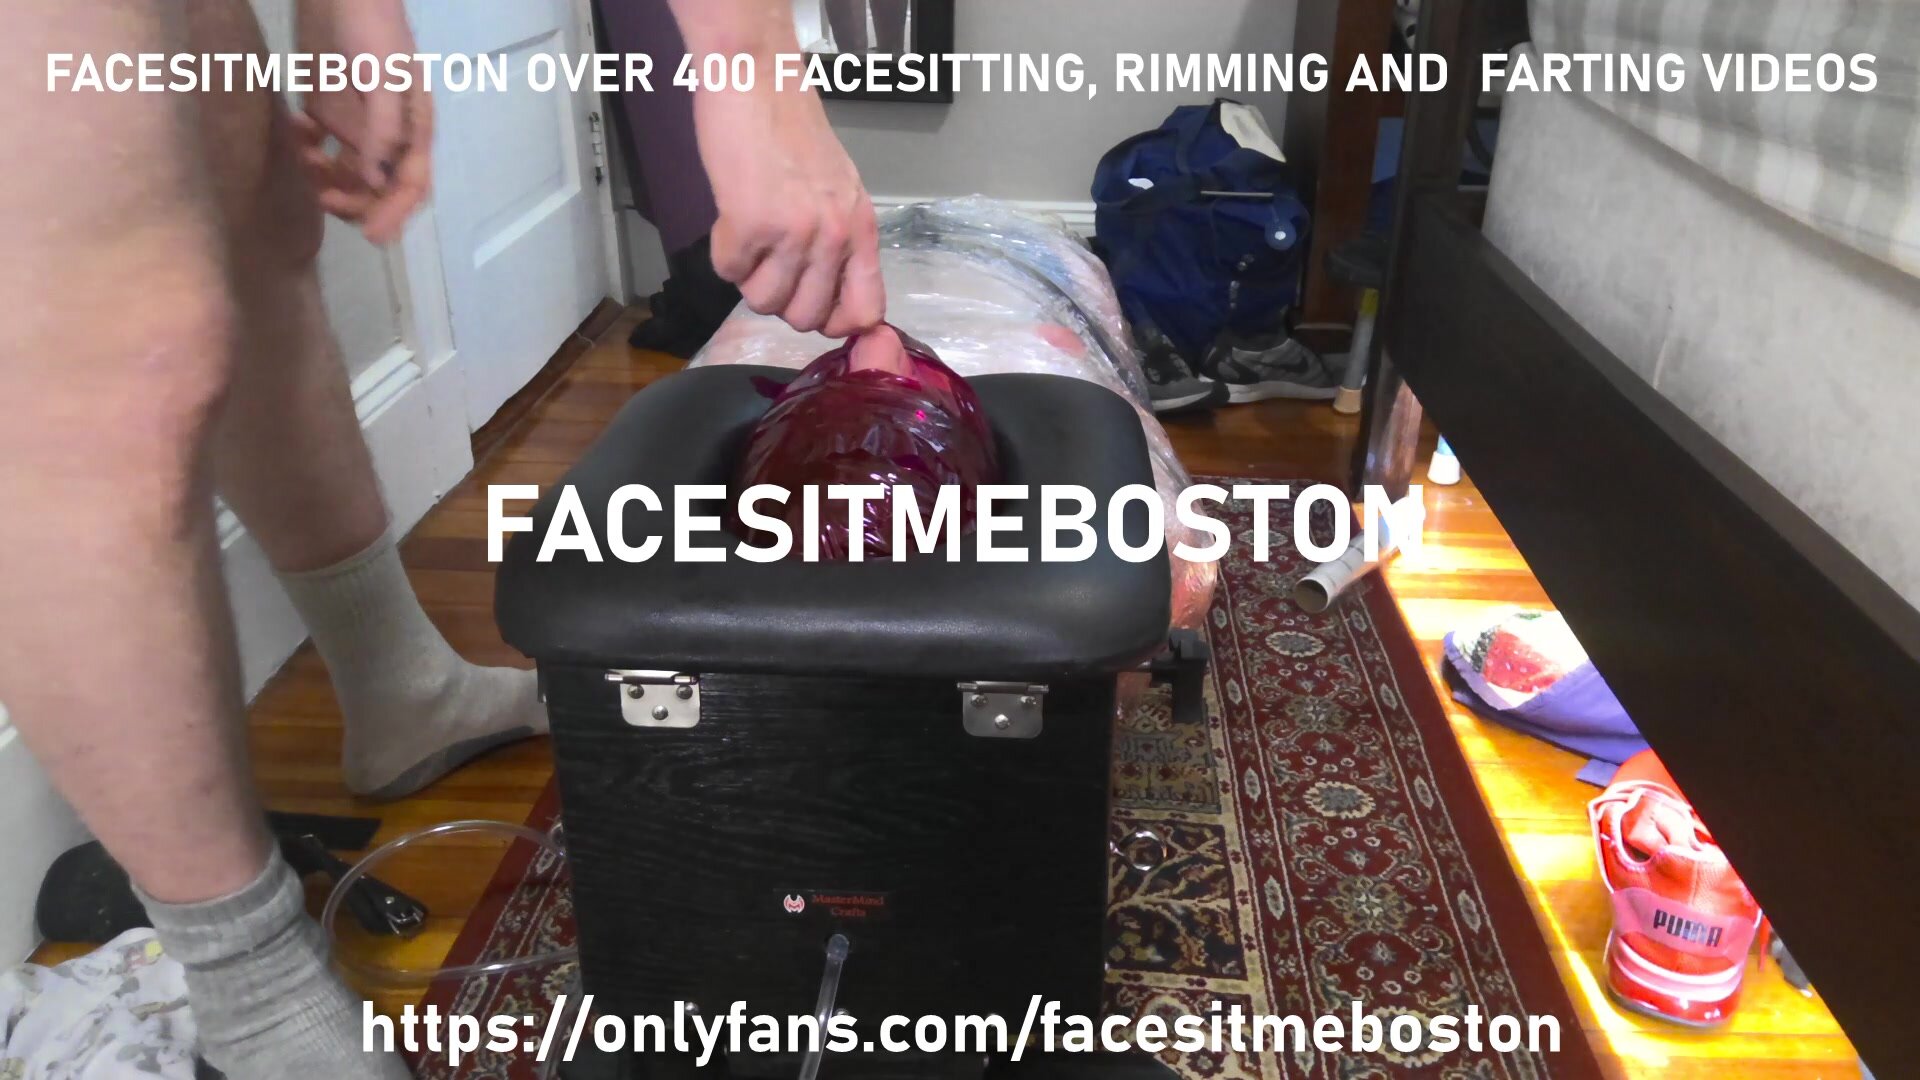 Facesitmeboston is an aggressive sitter!